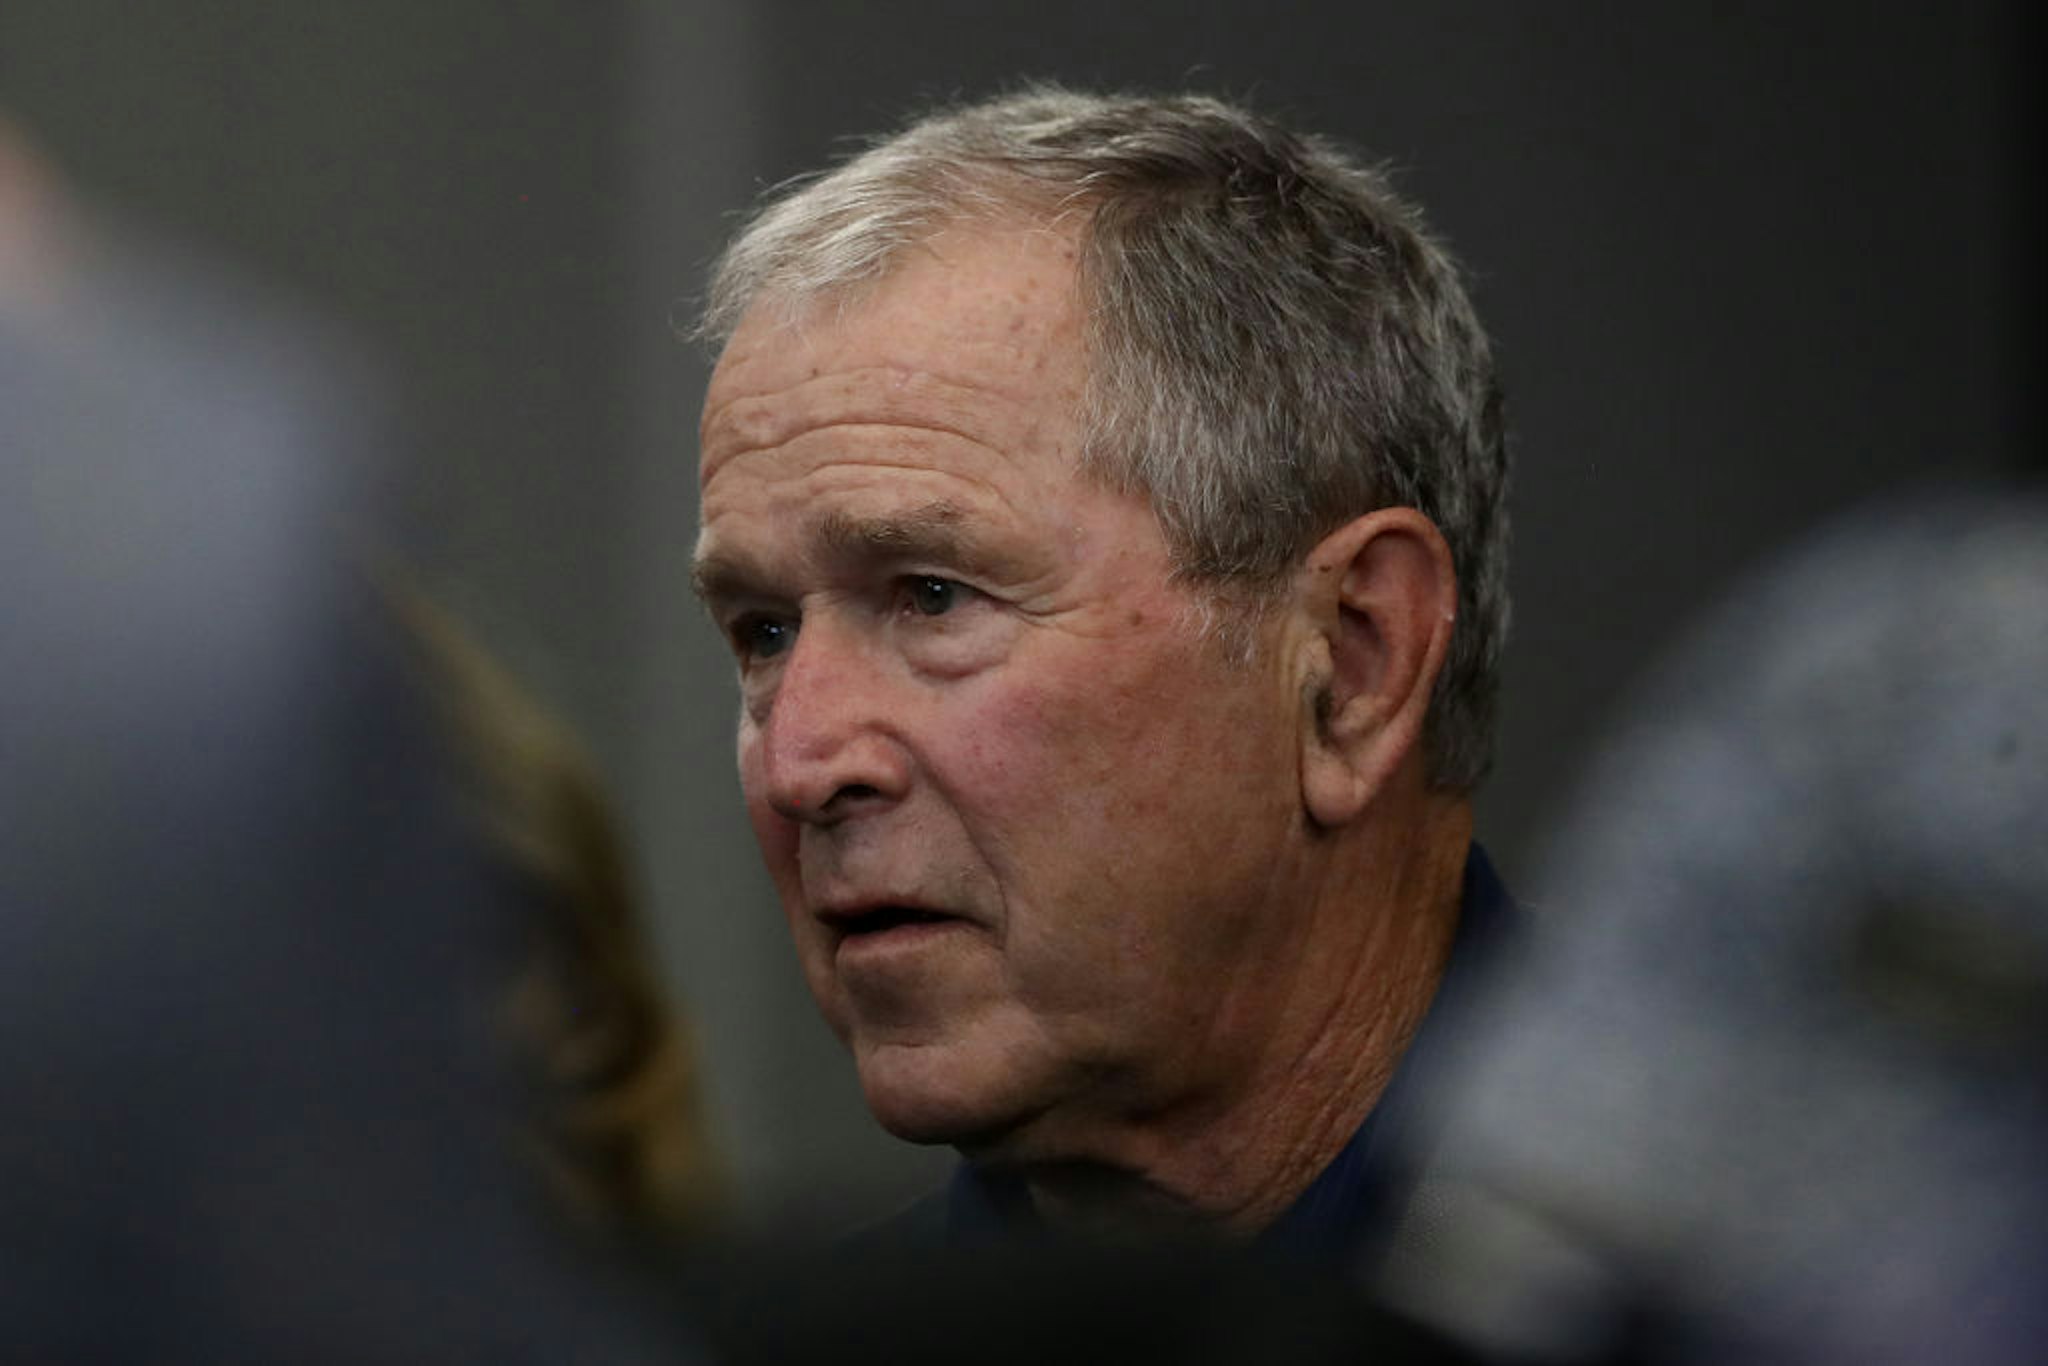 Former President George W. Bush attends the NFL game between the Dallas Cowboys and the Green Bay Packers at AT&amp;T Stadium on October 06, 2019 in Arlington, Texas.